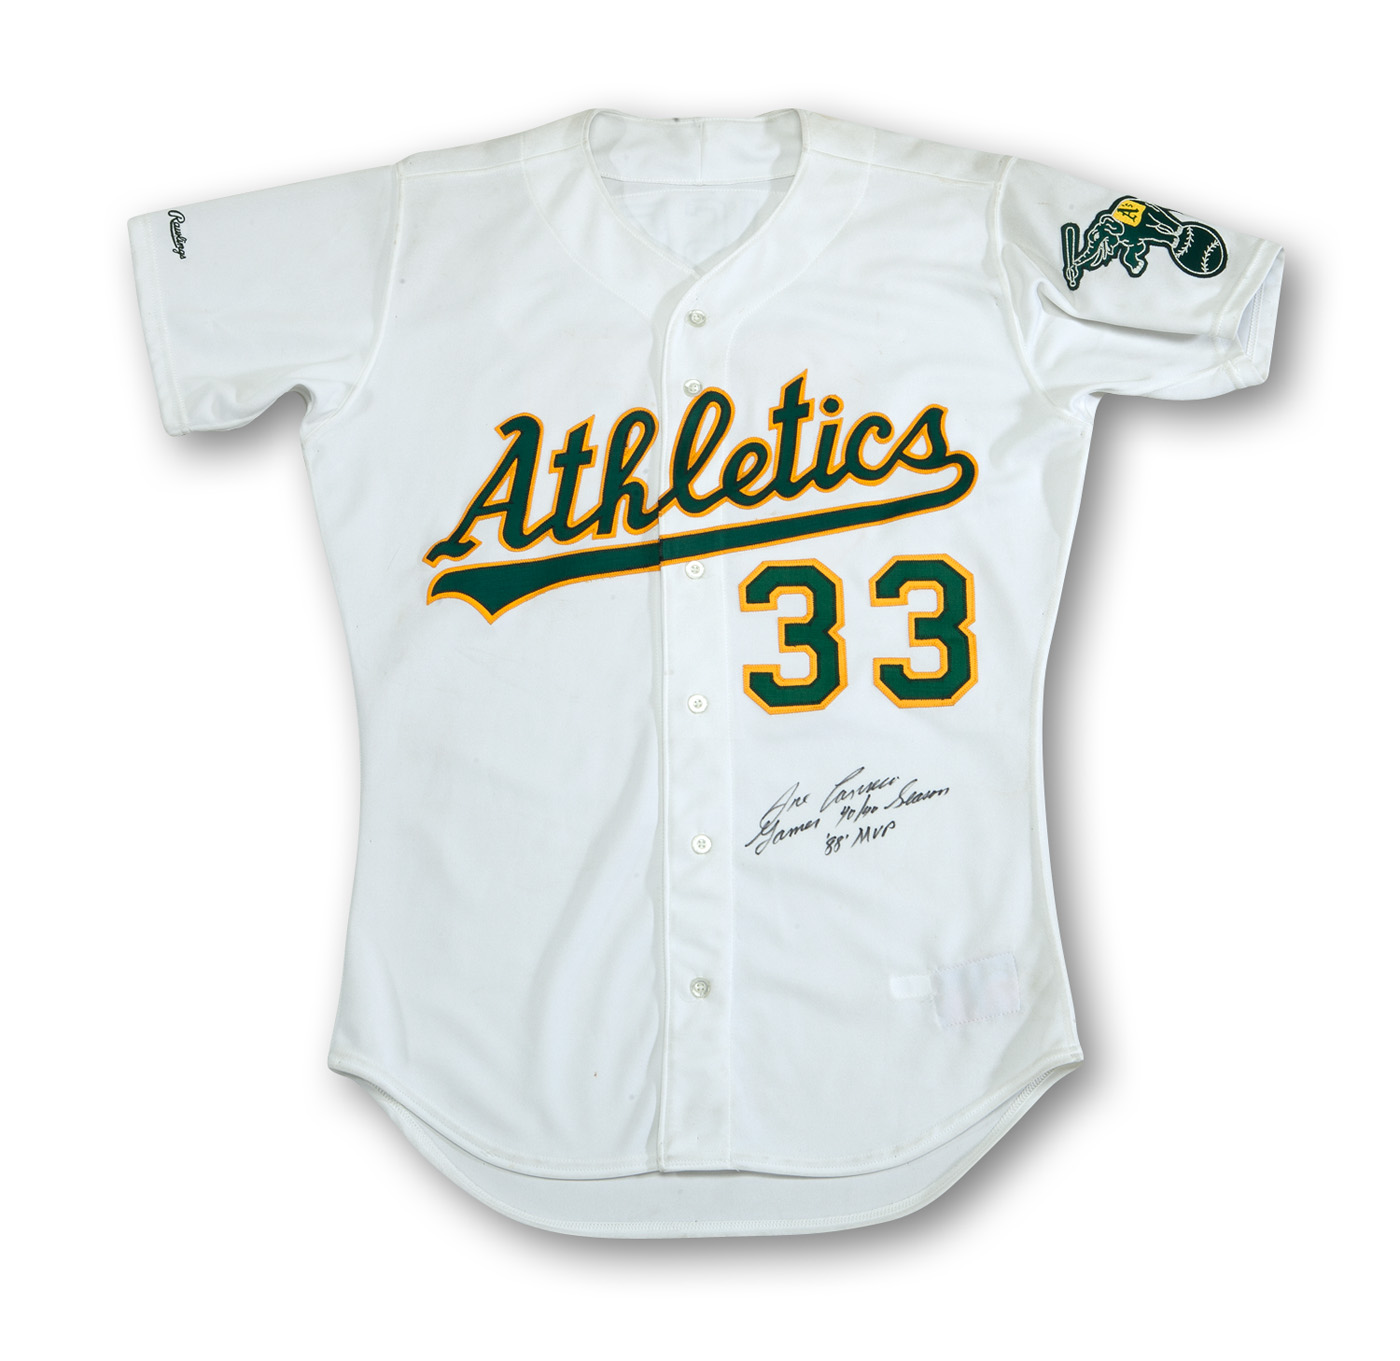 Oakland Athletics Blank Game Issued Yellow Jersey 46 DP48508